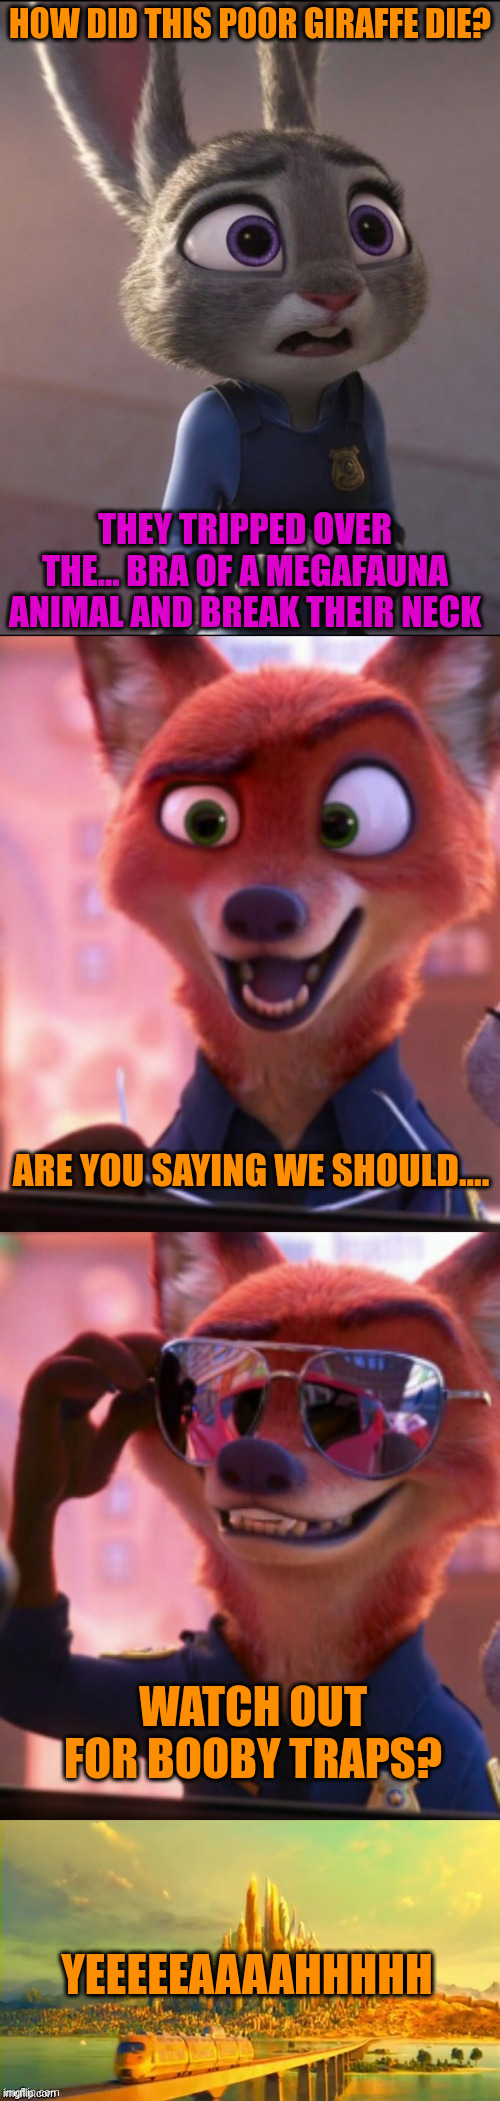 CSI Zootopia Giraffe | HOW DID THIS POOR GIRAFFE DIE? THEY TRIPPED OVER THE... BRA OF A MEGAFAUNA ANIMAL AND BREAK THEIR NECK; ARE YOU SAYING WE SHOULD.... WATCH OUT FOR BOOBY TRAPS? YEEEEEAAAAHHHHH | image tagged in csi zootopia | made w/ Imgflip meme maker